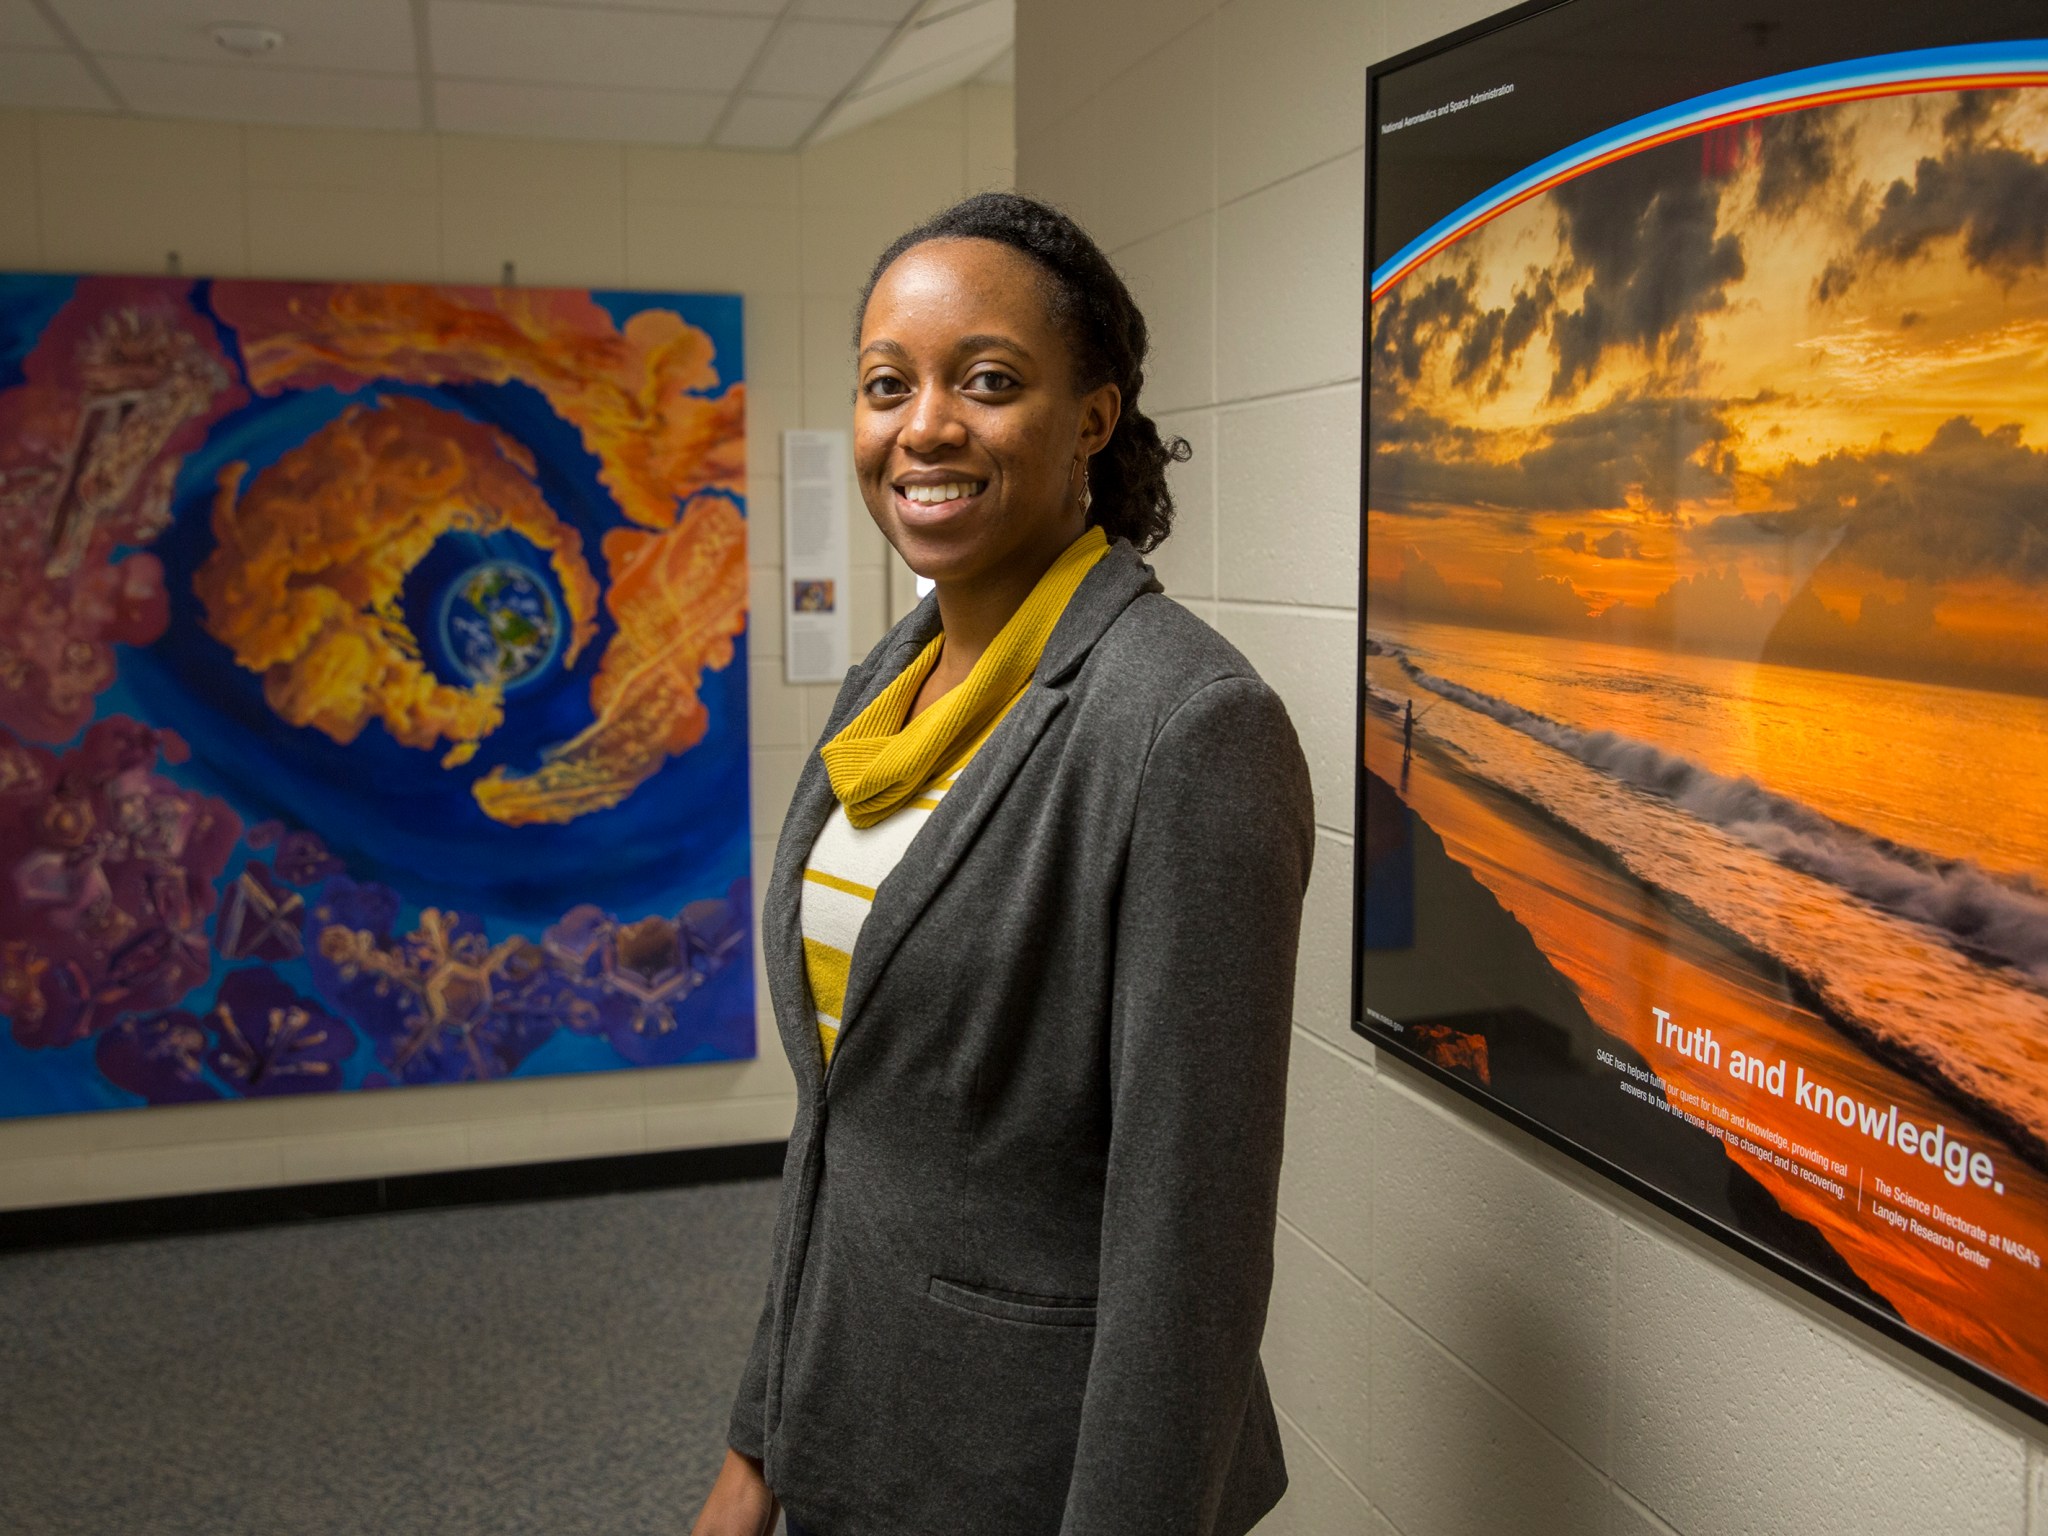 This is a photo of Yolanda Shea, a Physical Research Scientist at NASA Langley Research Center.